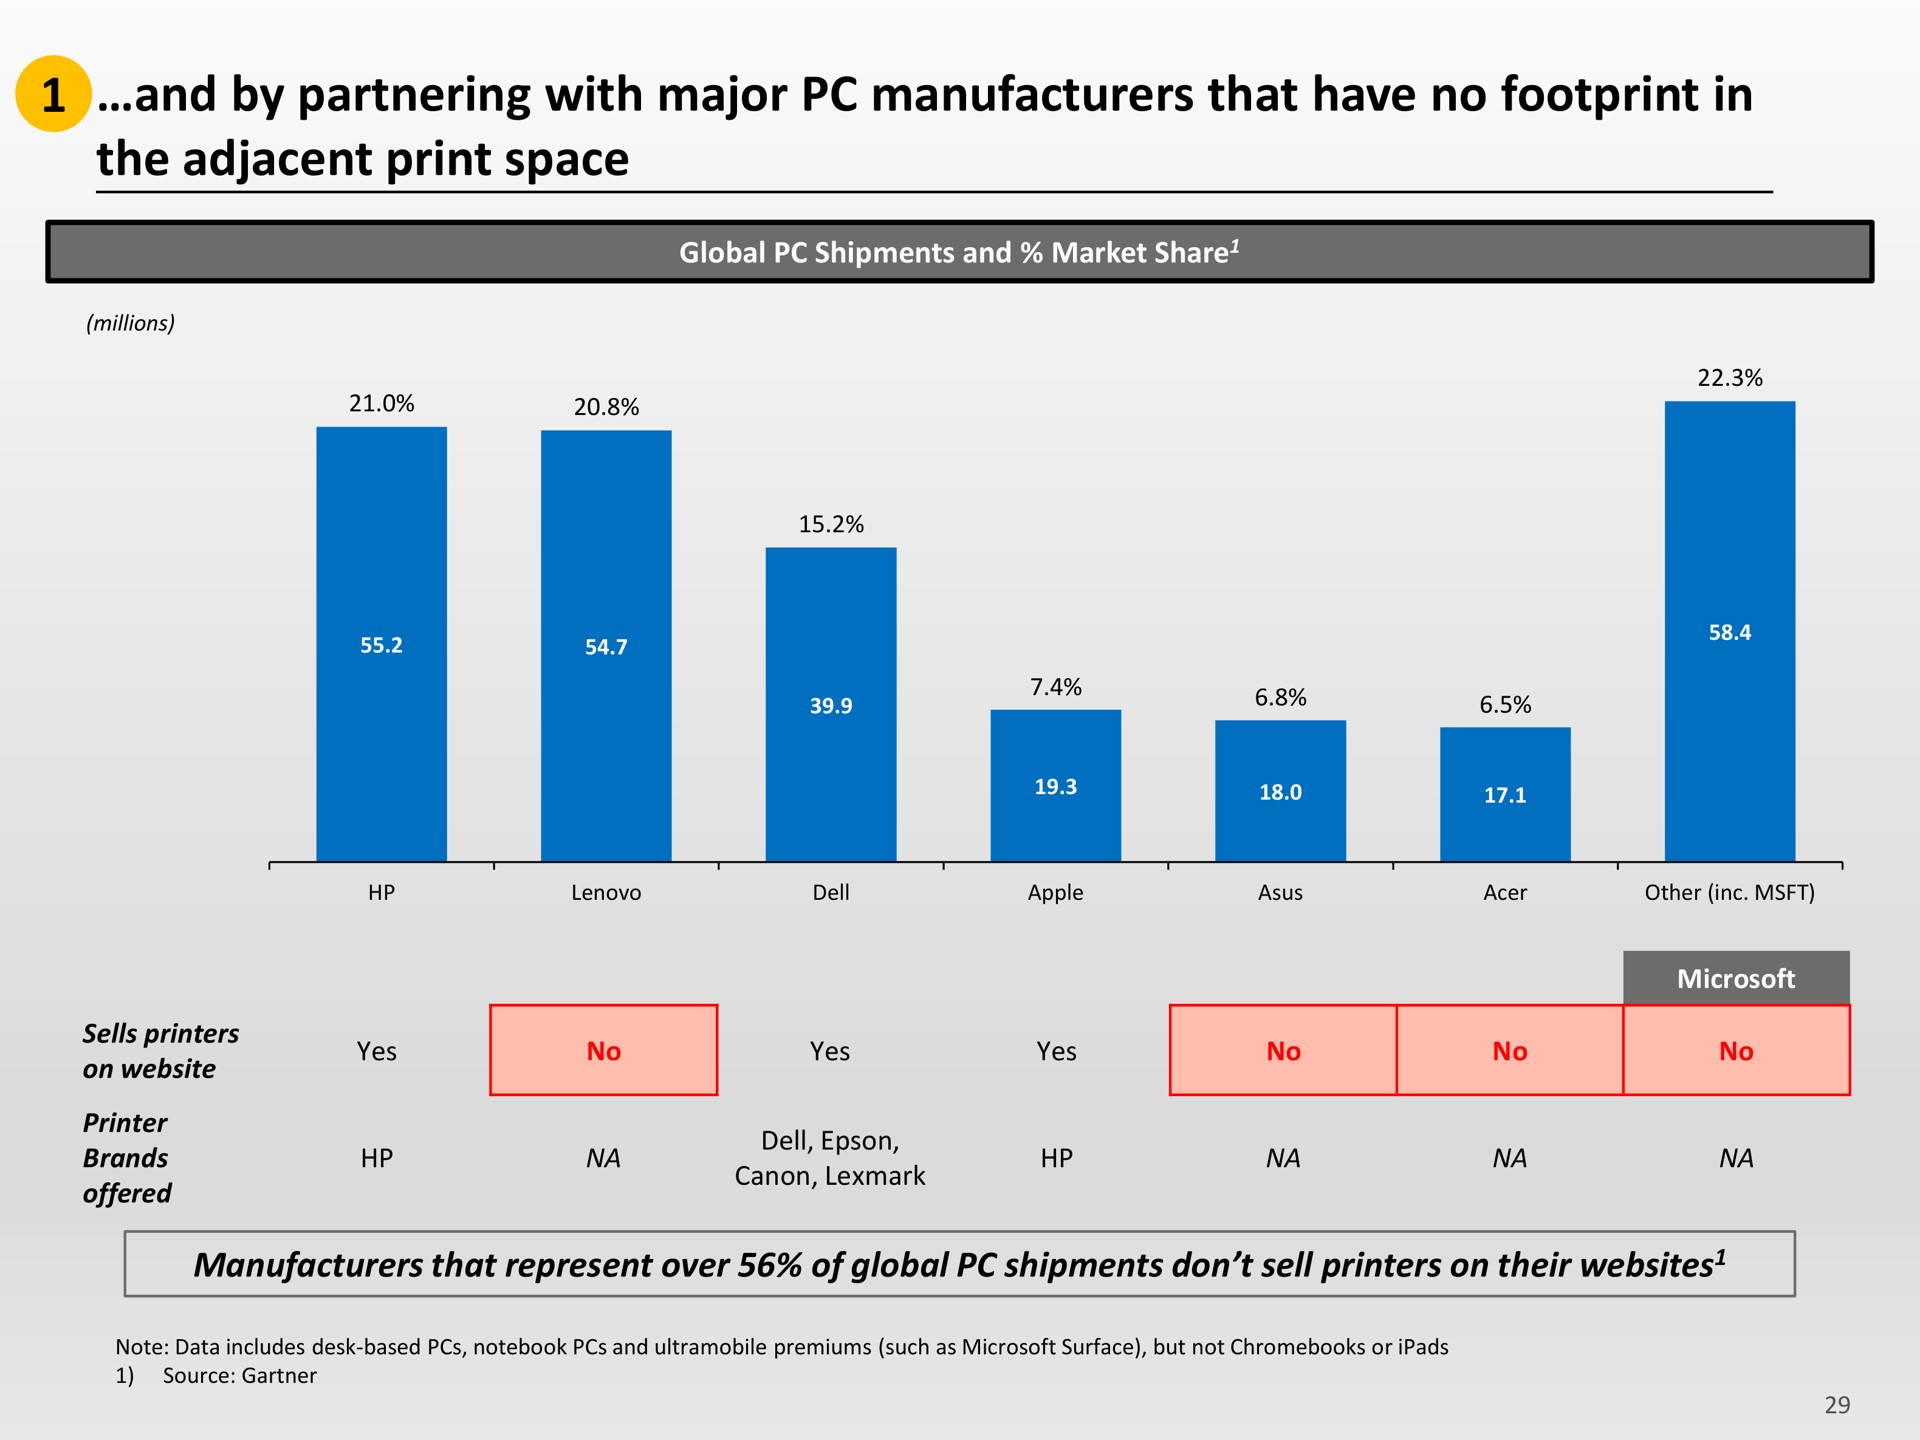 and by partnering with major manufacturers that have no footprint in the adjacent print space | Icahn Enterprises